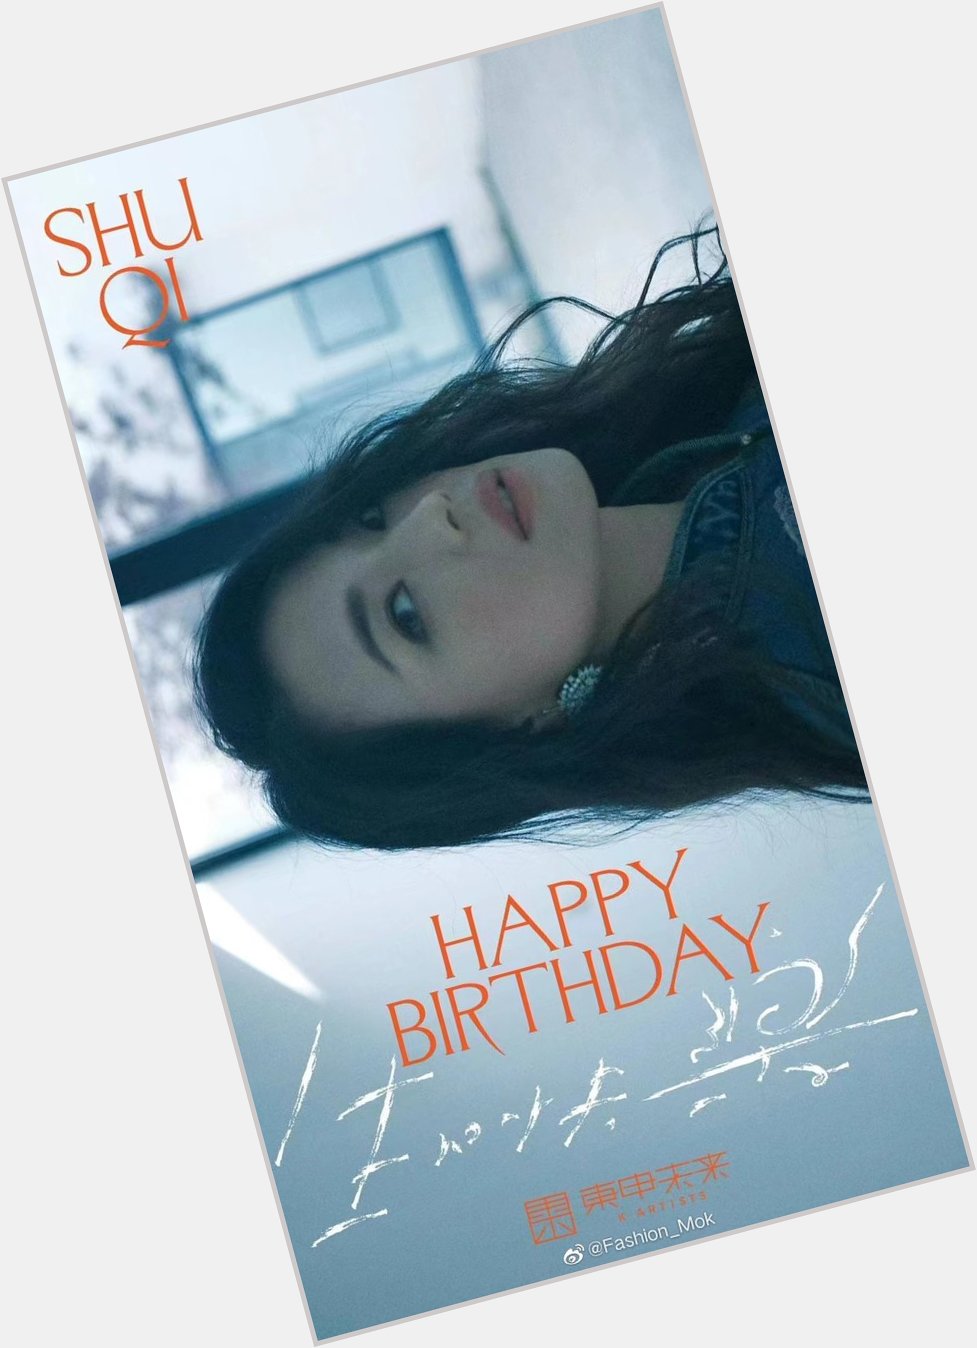 And it is also Shu Qi\s bday! Happy bday to this iconic queen   